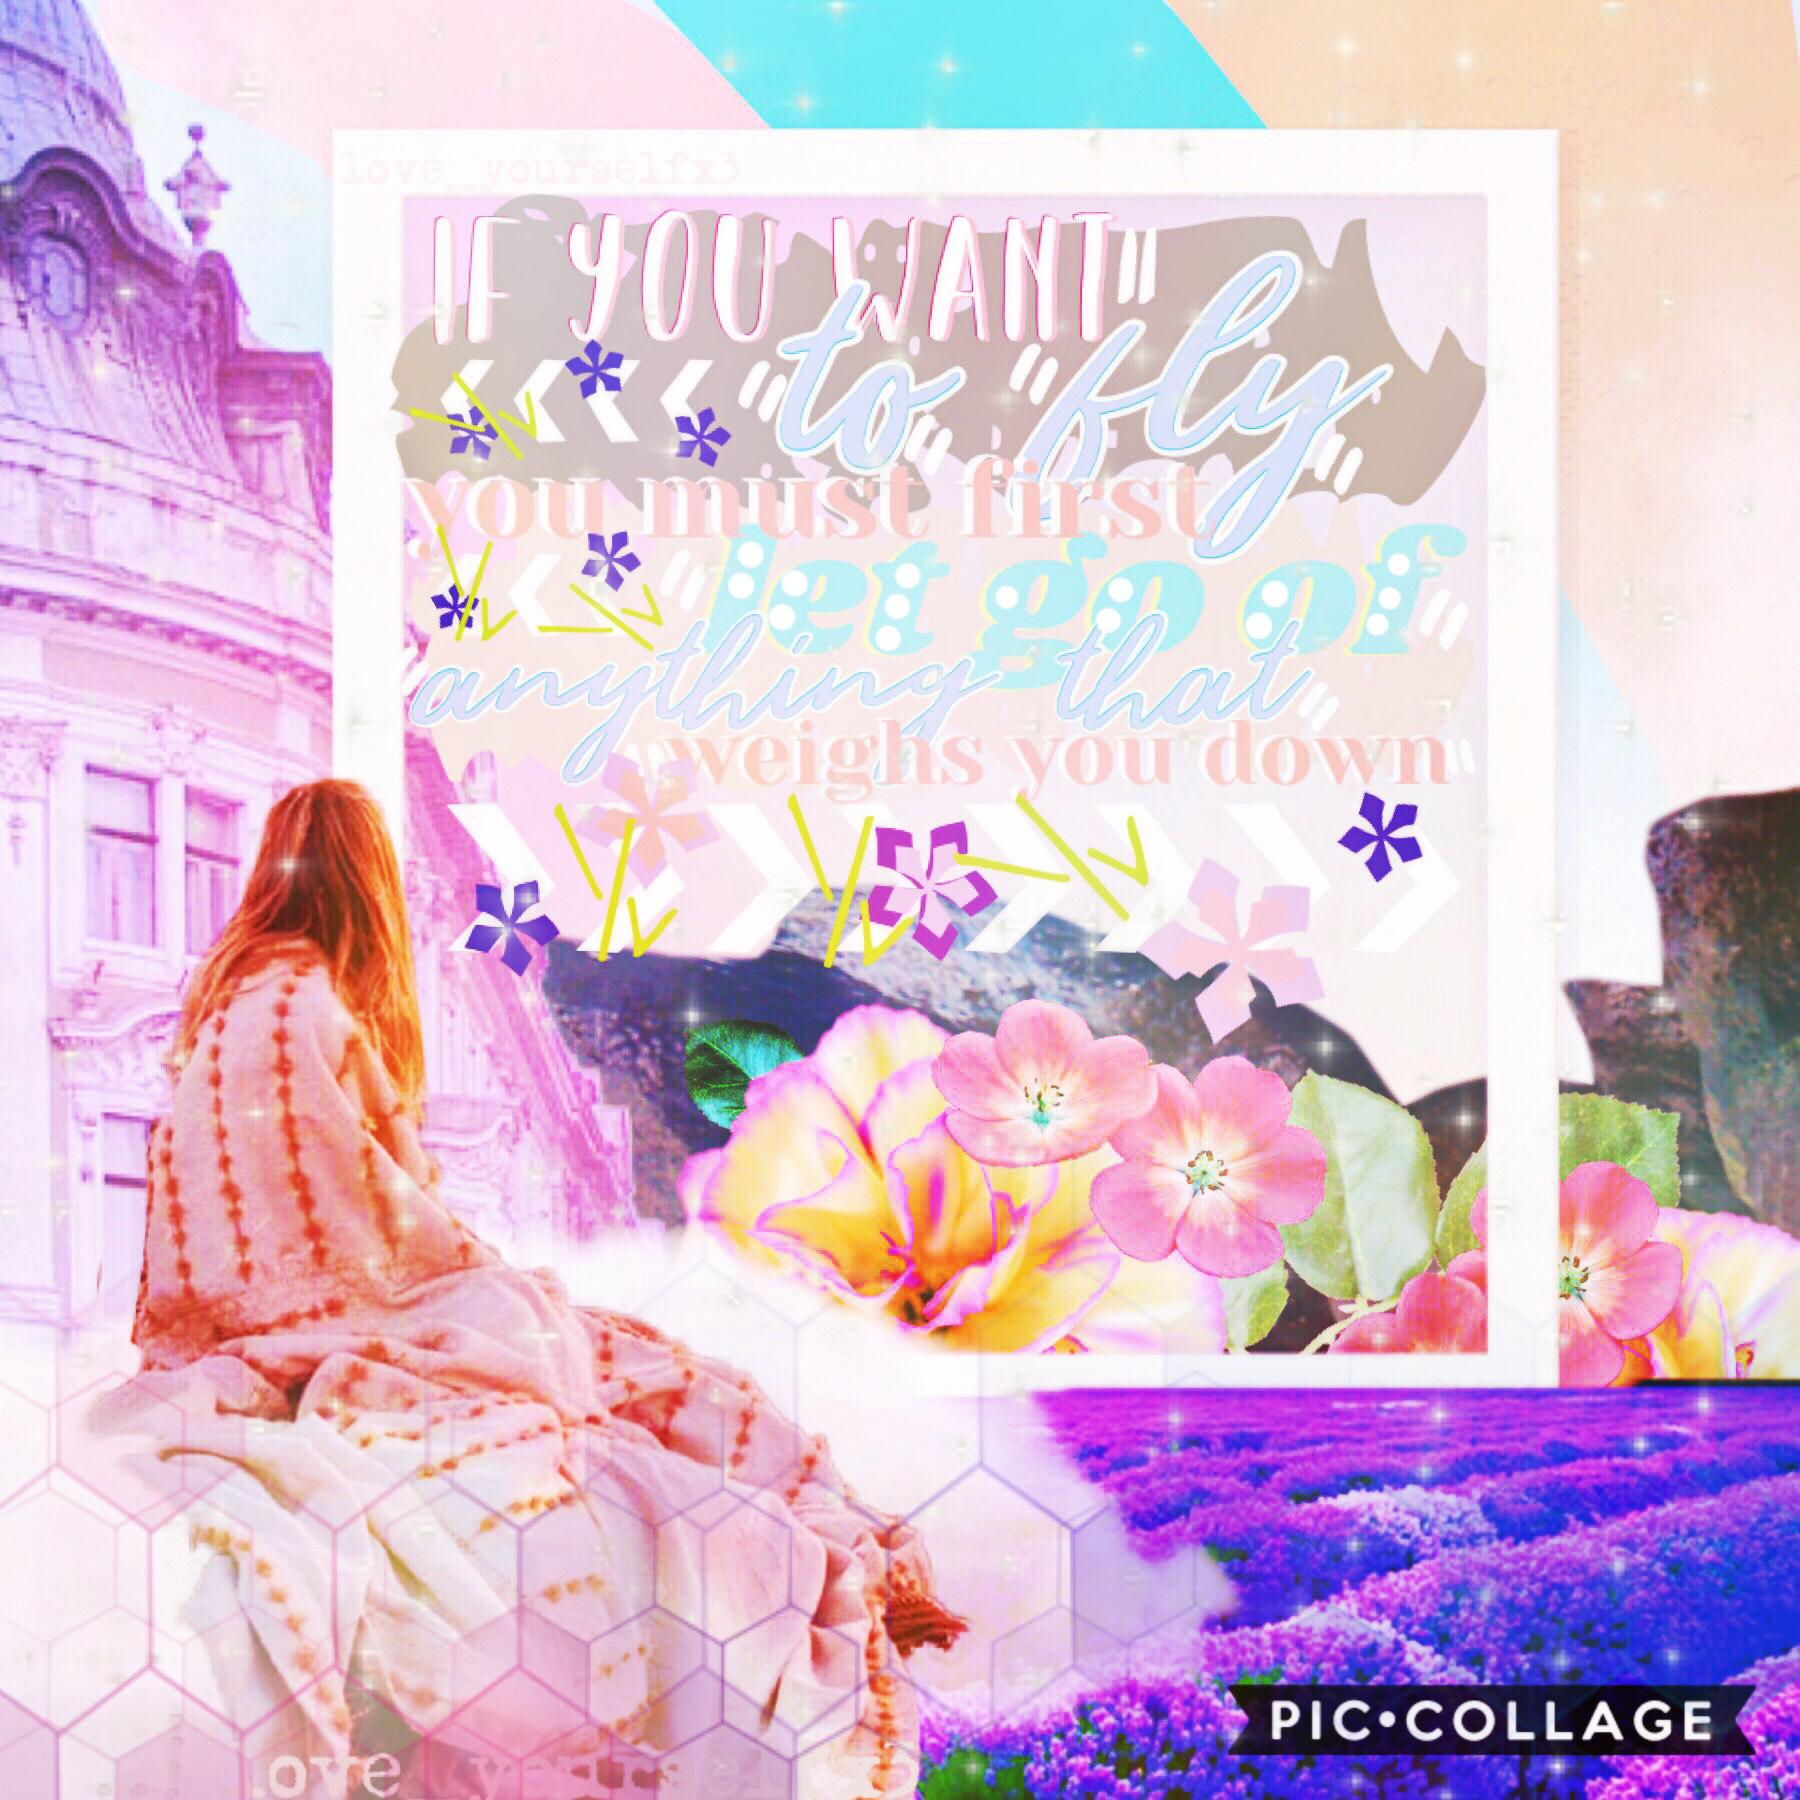 Was feeling stressed so here you go~ (Tap!)

Oof I feel like my edits aren’t rly original, agh I’m overrated honestly 😩 also oMg there is no contrast whatsoever but I was doing this to relax so I Guess the colour scheme makes sense

qotd ⬇️⬇️